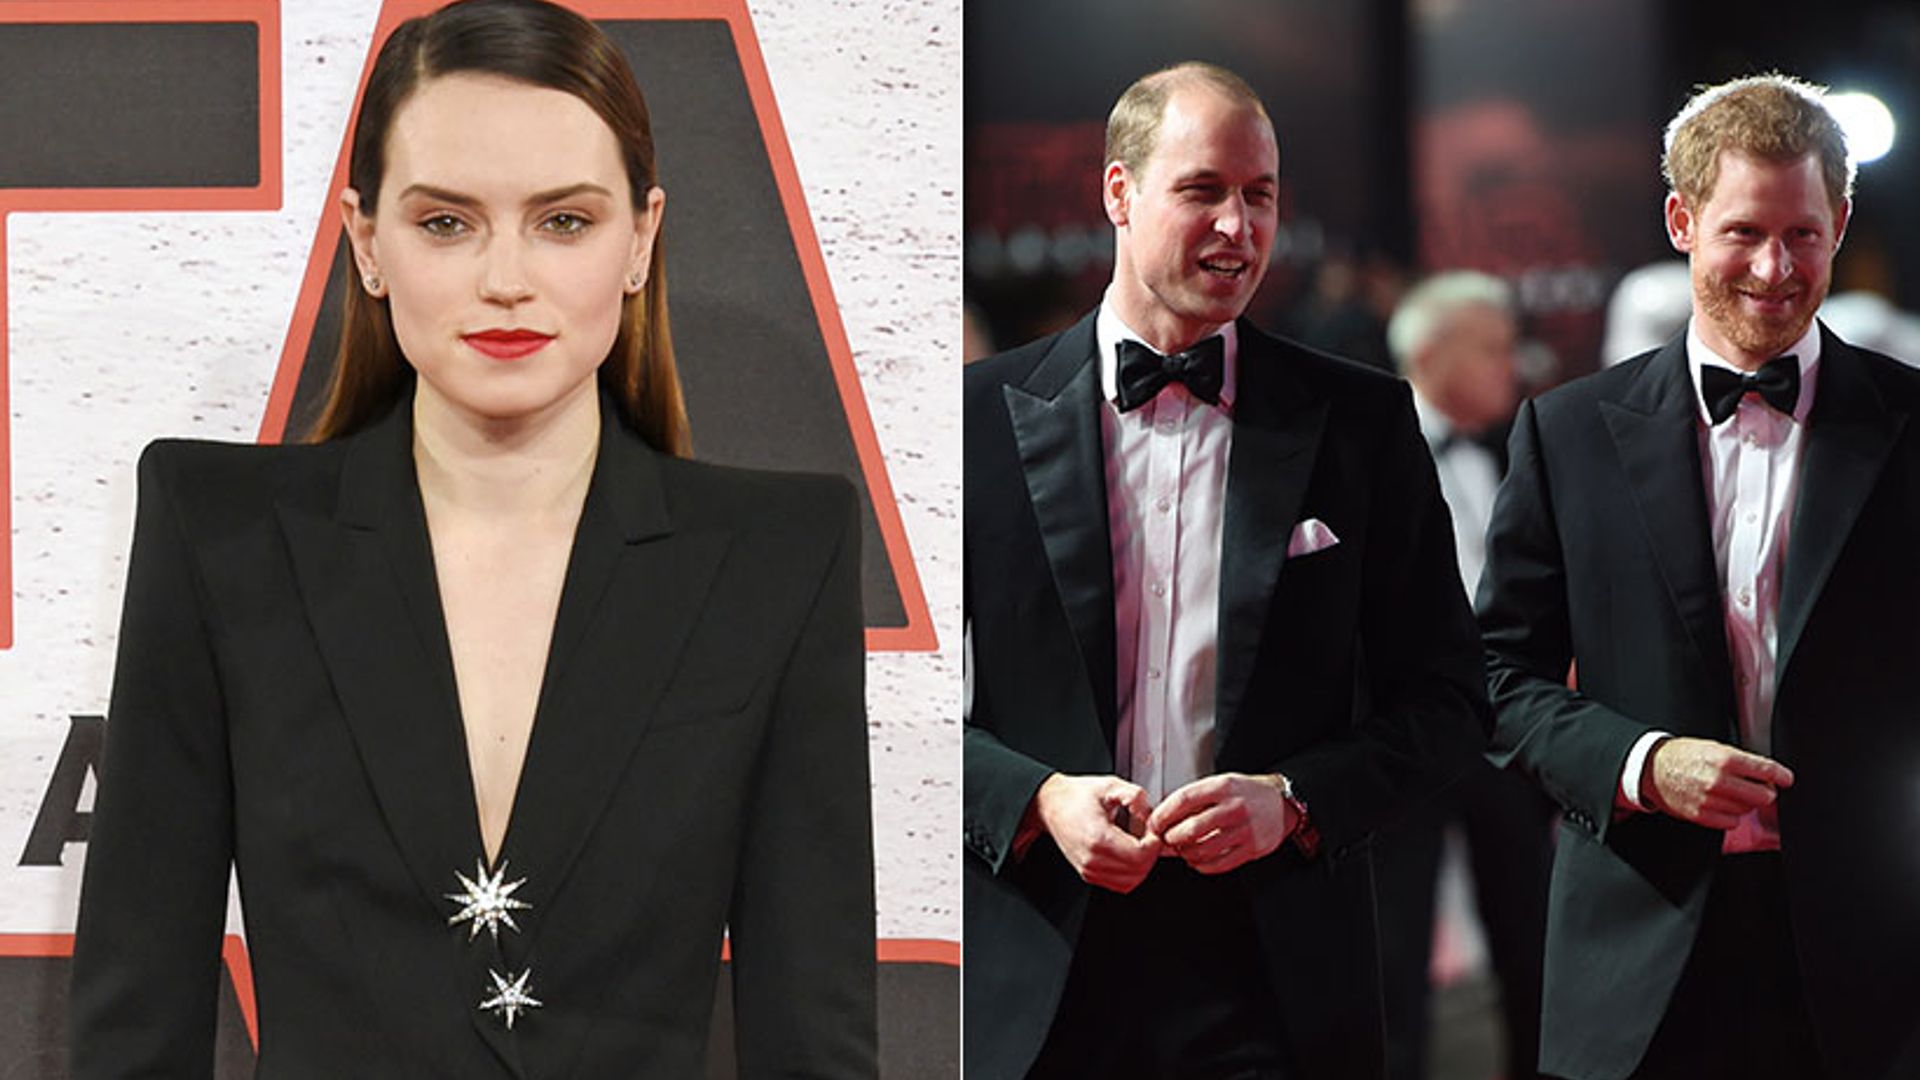 Star Wars actress Daisy Ridley reveals meeting Prince William and Prince Harry was 'awkward'